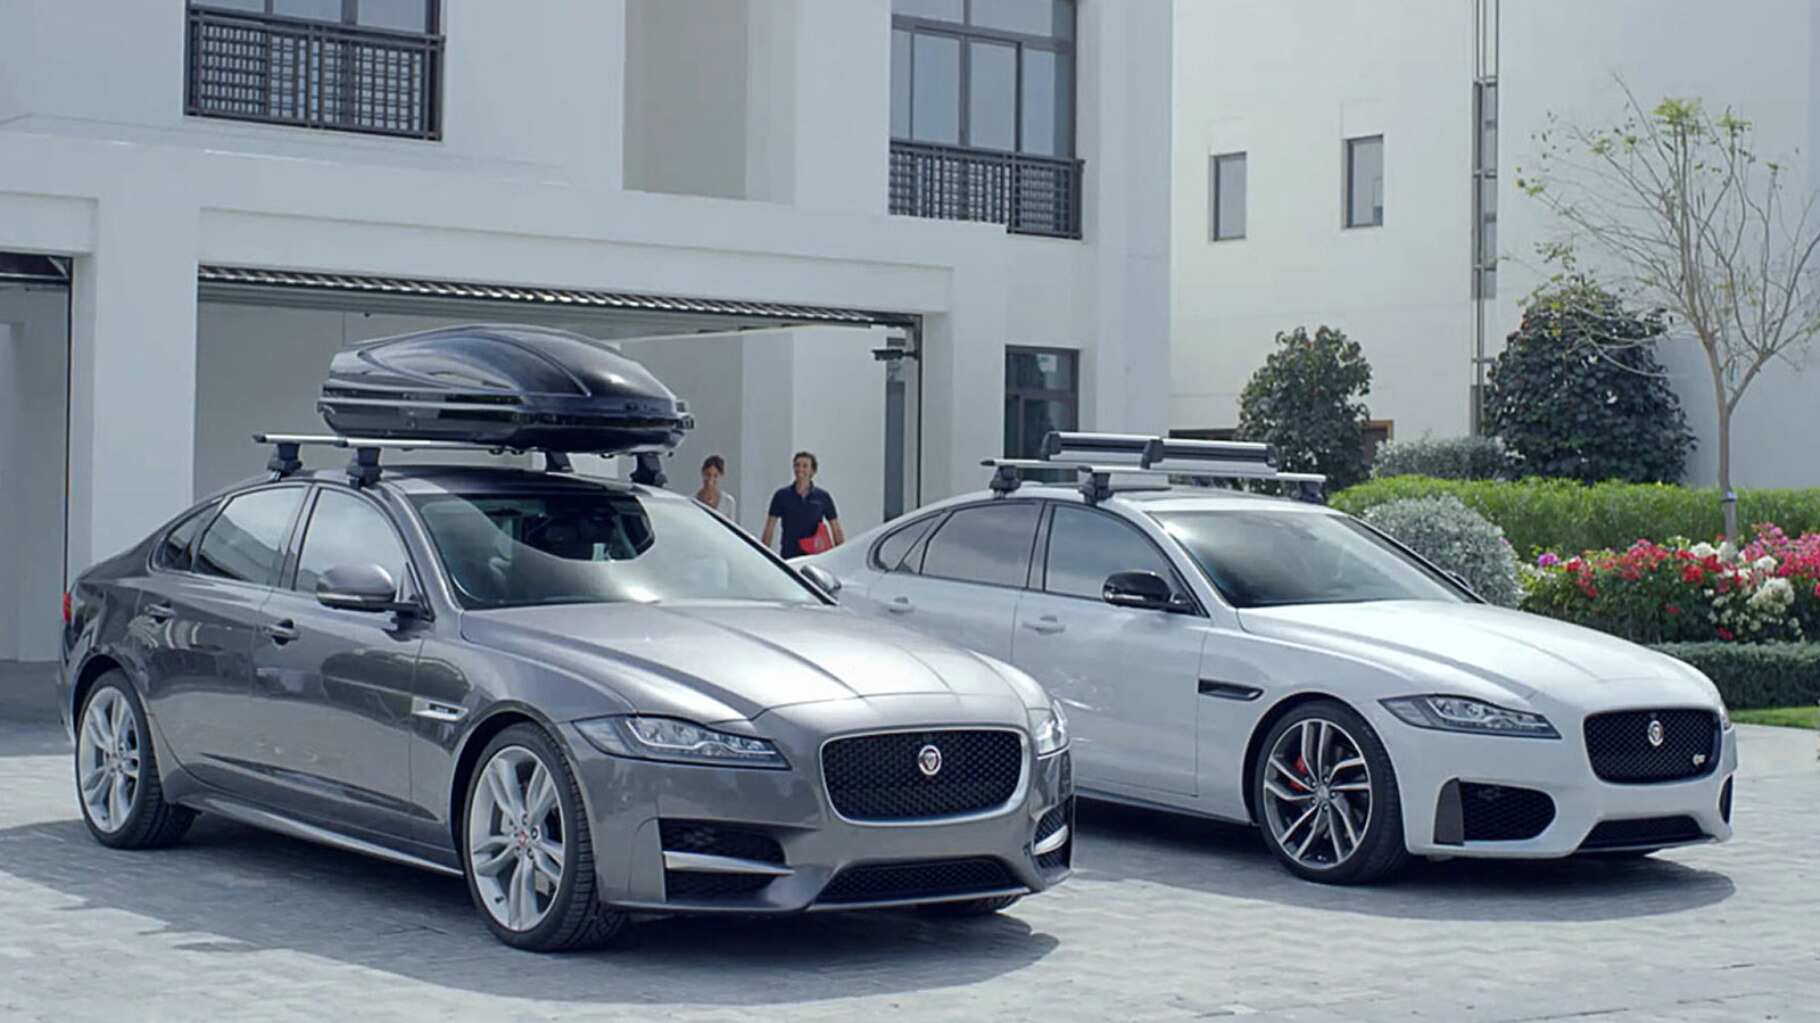 Two Jaguar XF Saloons parked with fitted accessories.